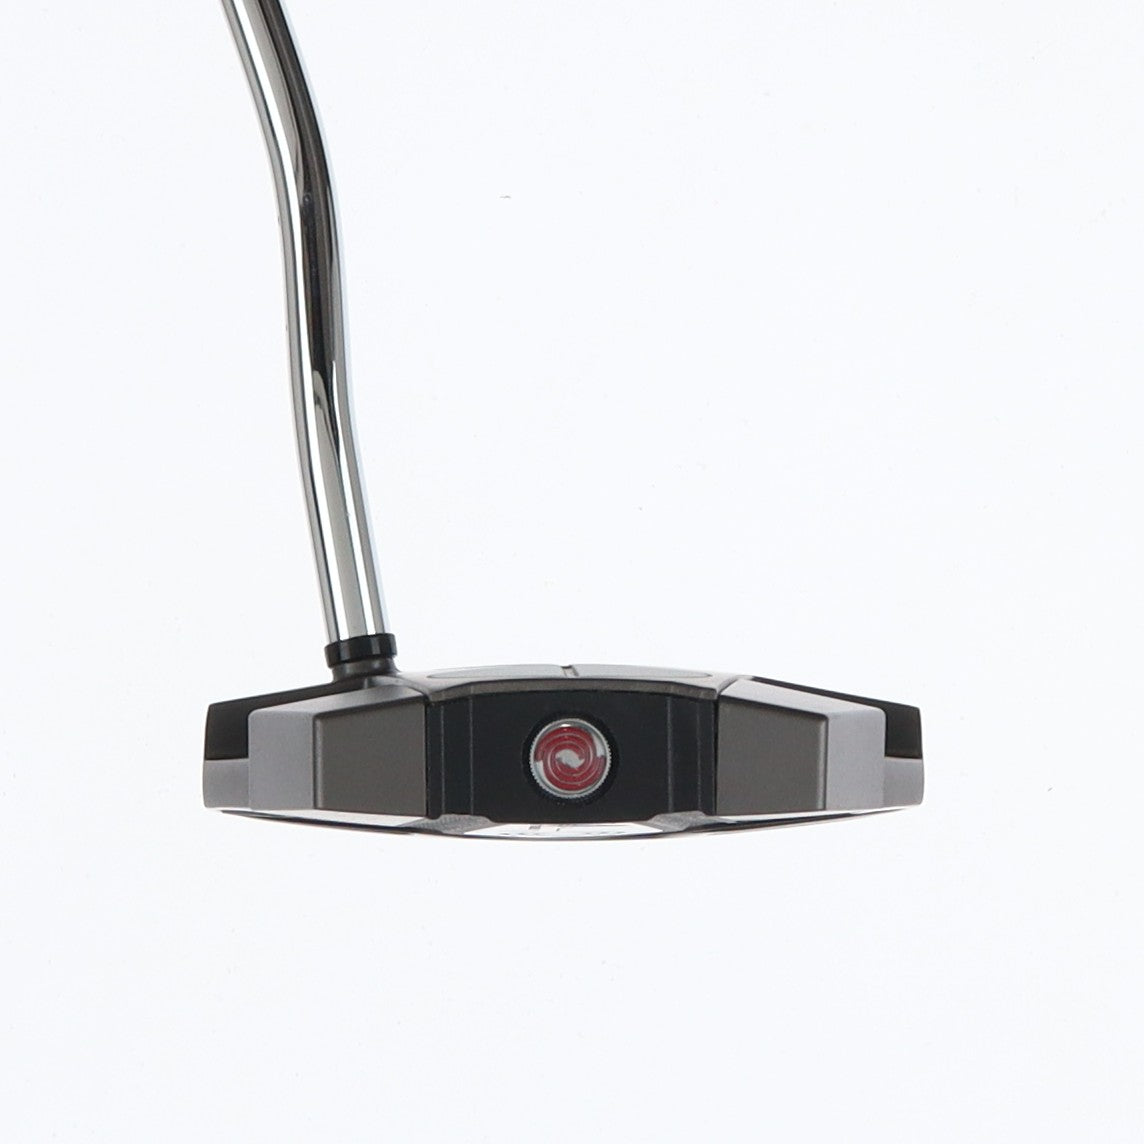 Odyssey Putter Open Box 2-BALL ELEVEN TOUR LINED 34 inch